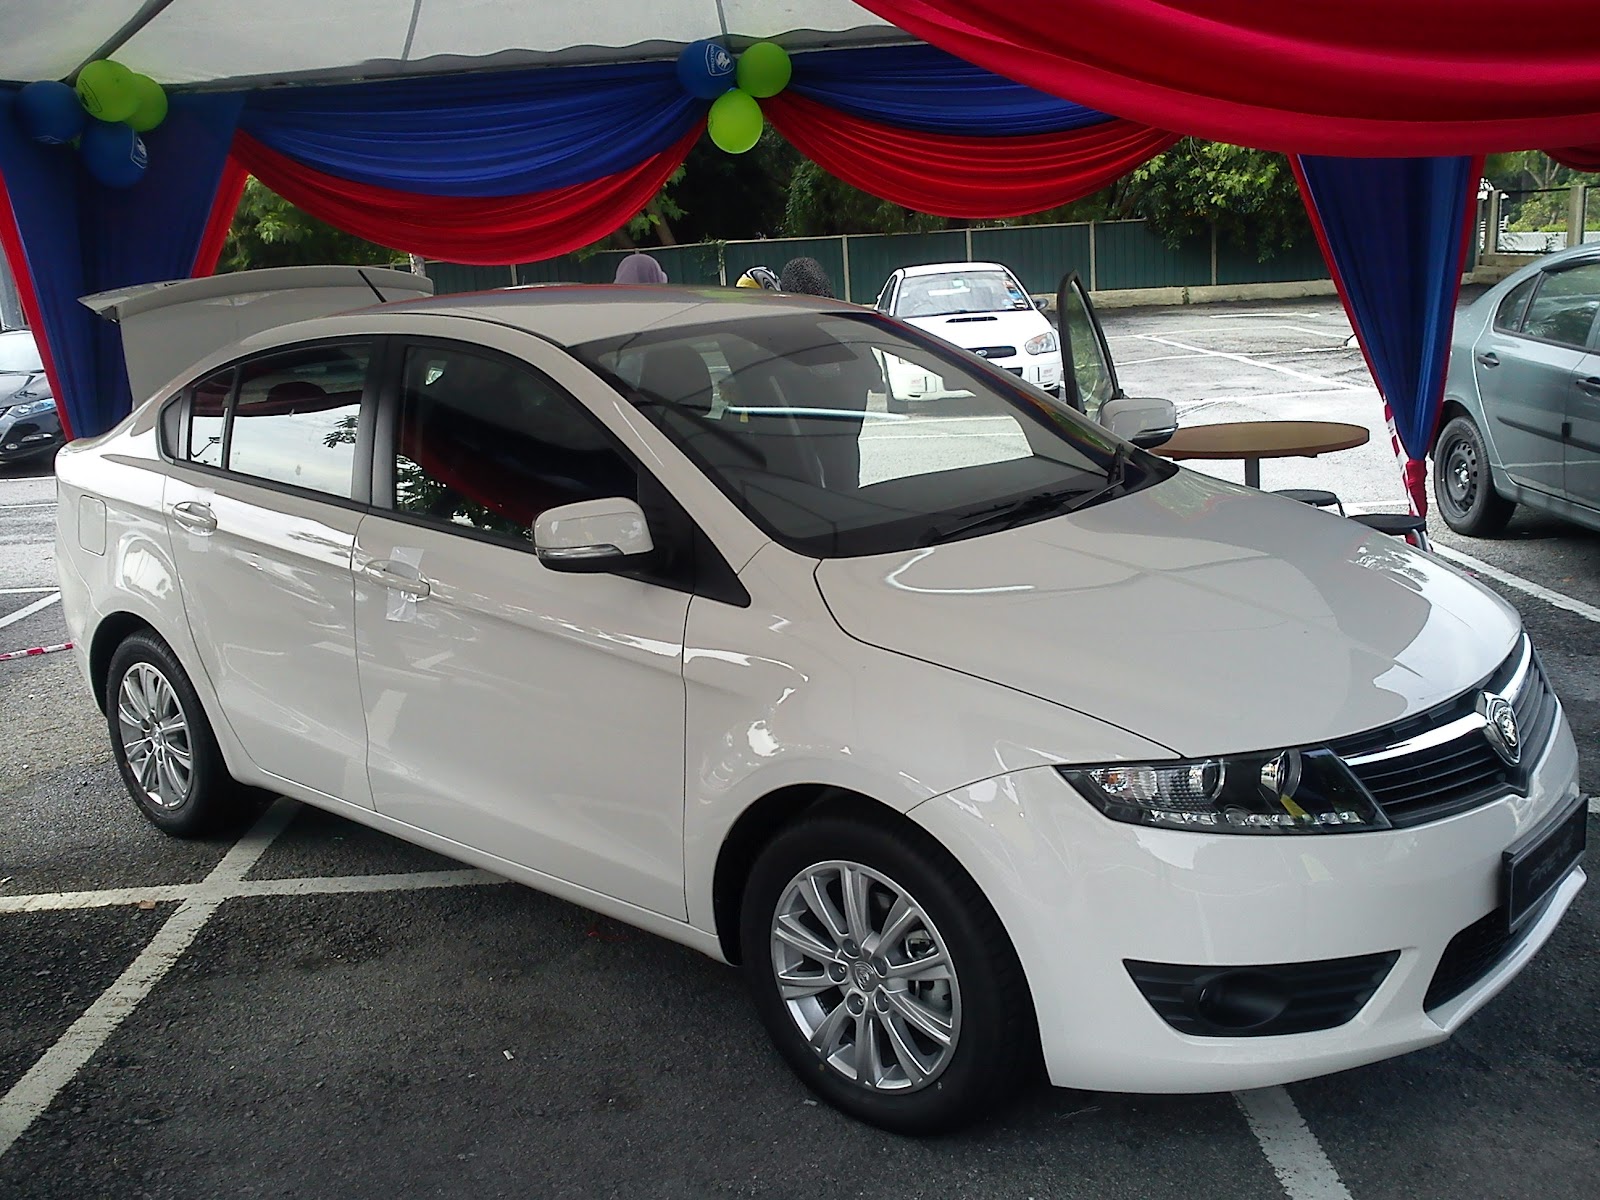 Motoring-Malaysia: First (Non Driving) Impressions of the 